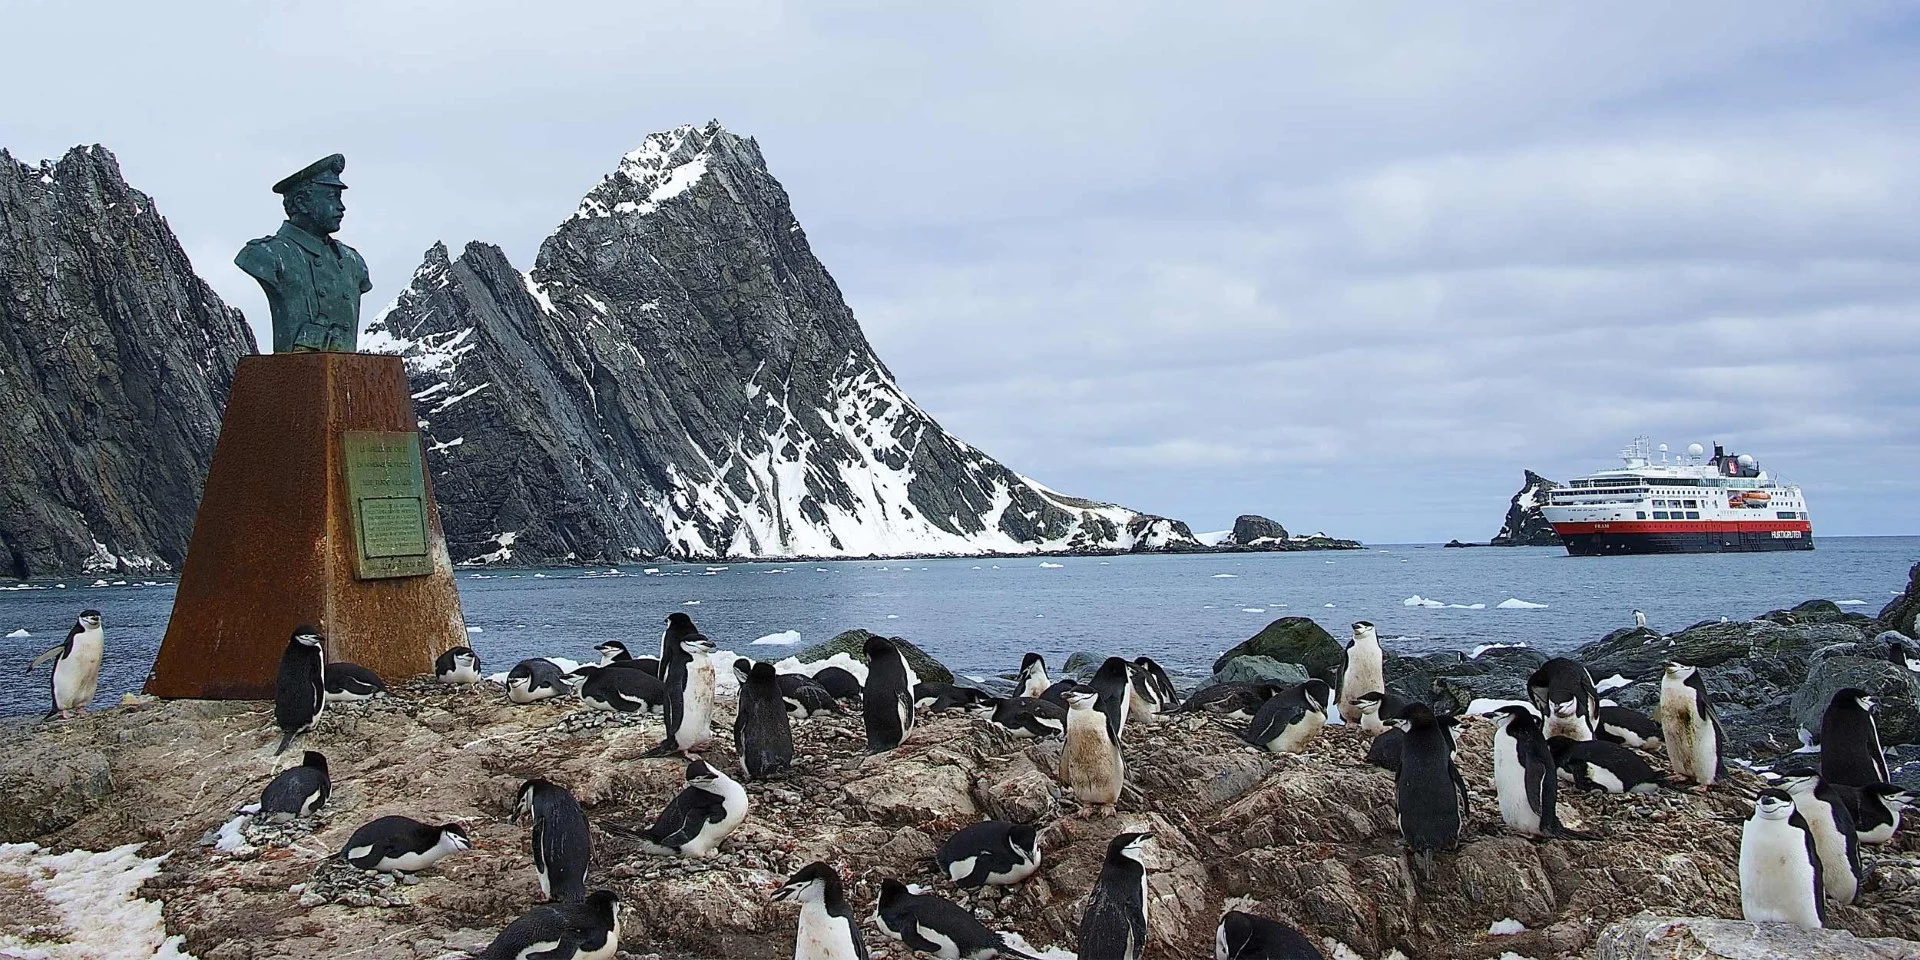 Elephant Island: Five Facts You Need to Know